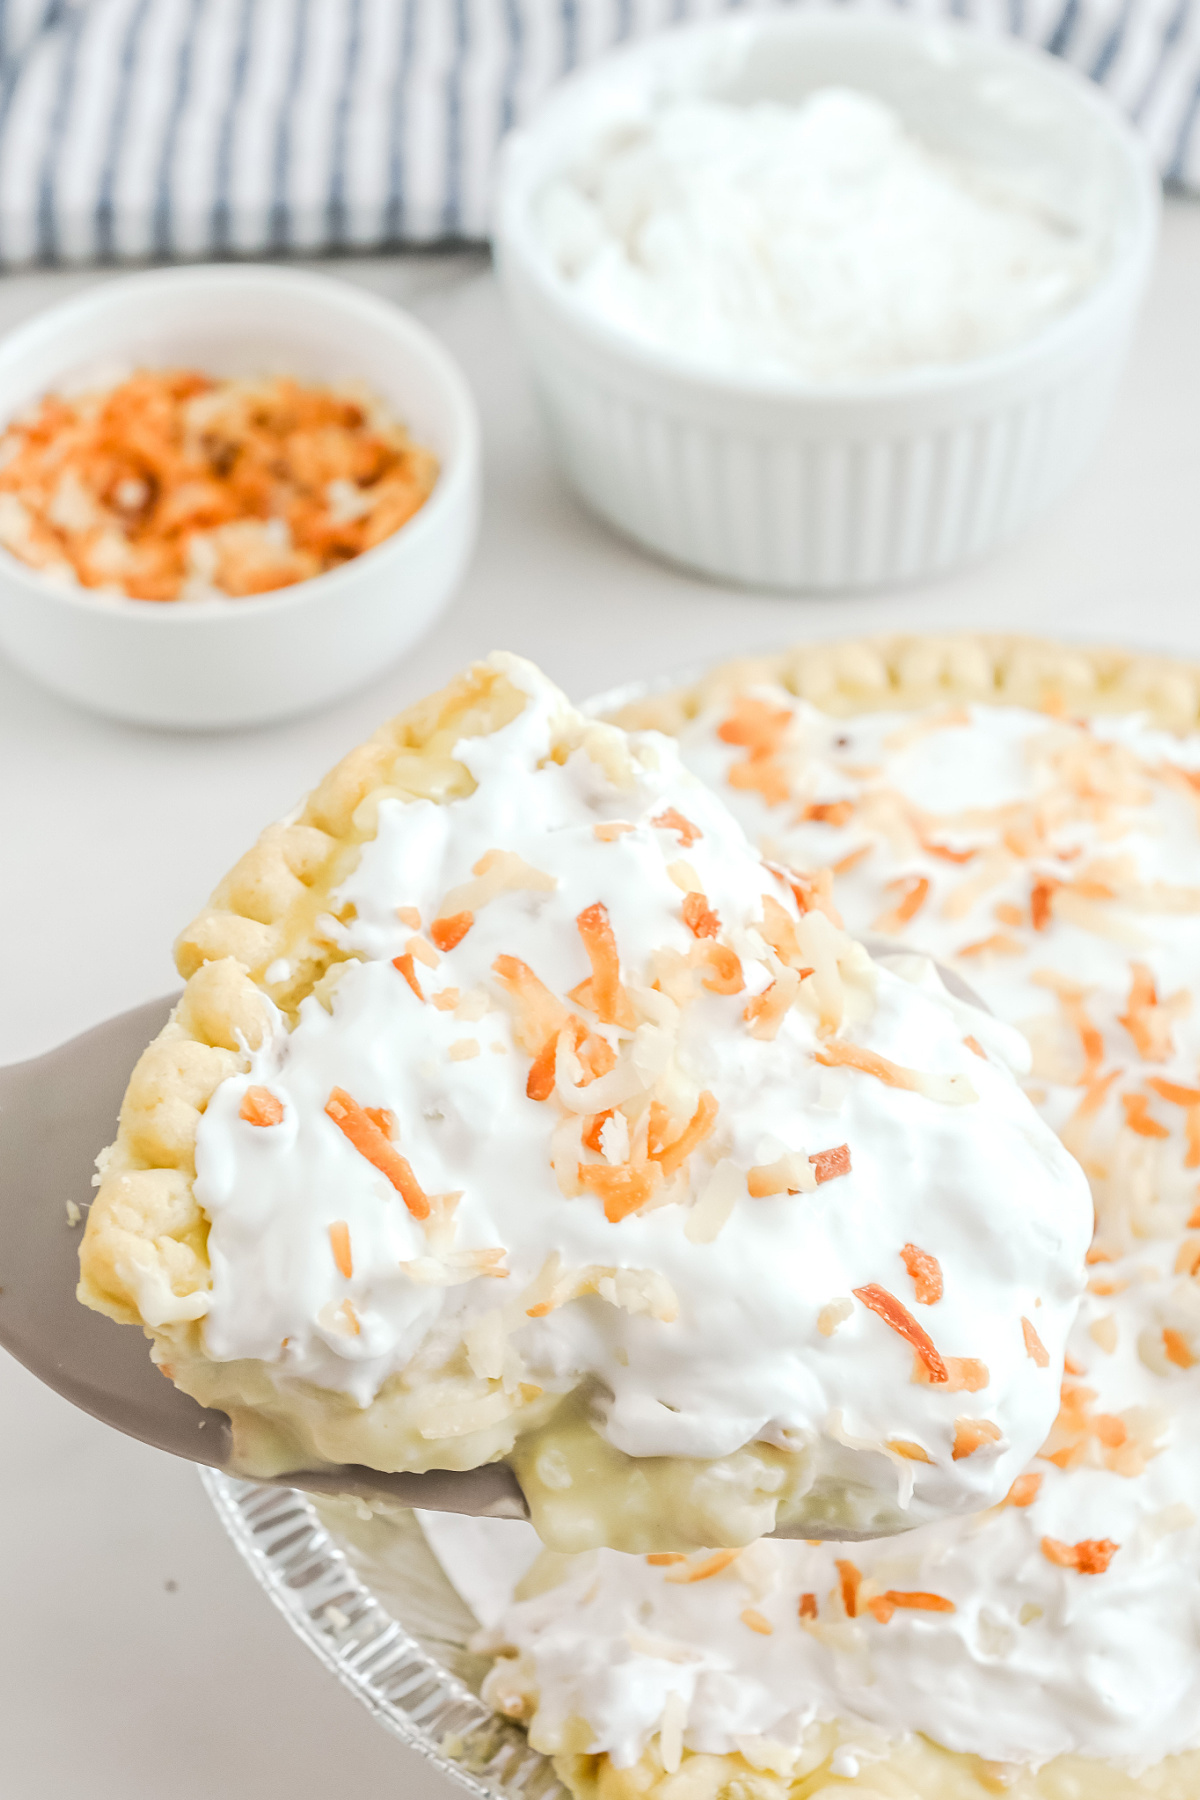 A slice of coconut cream pie with whipped cream and coconut.